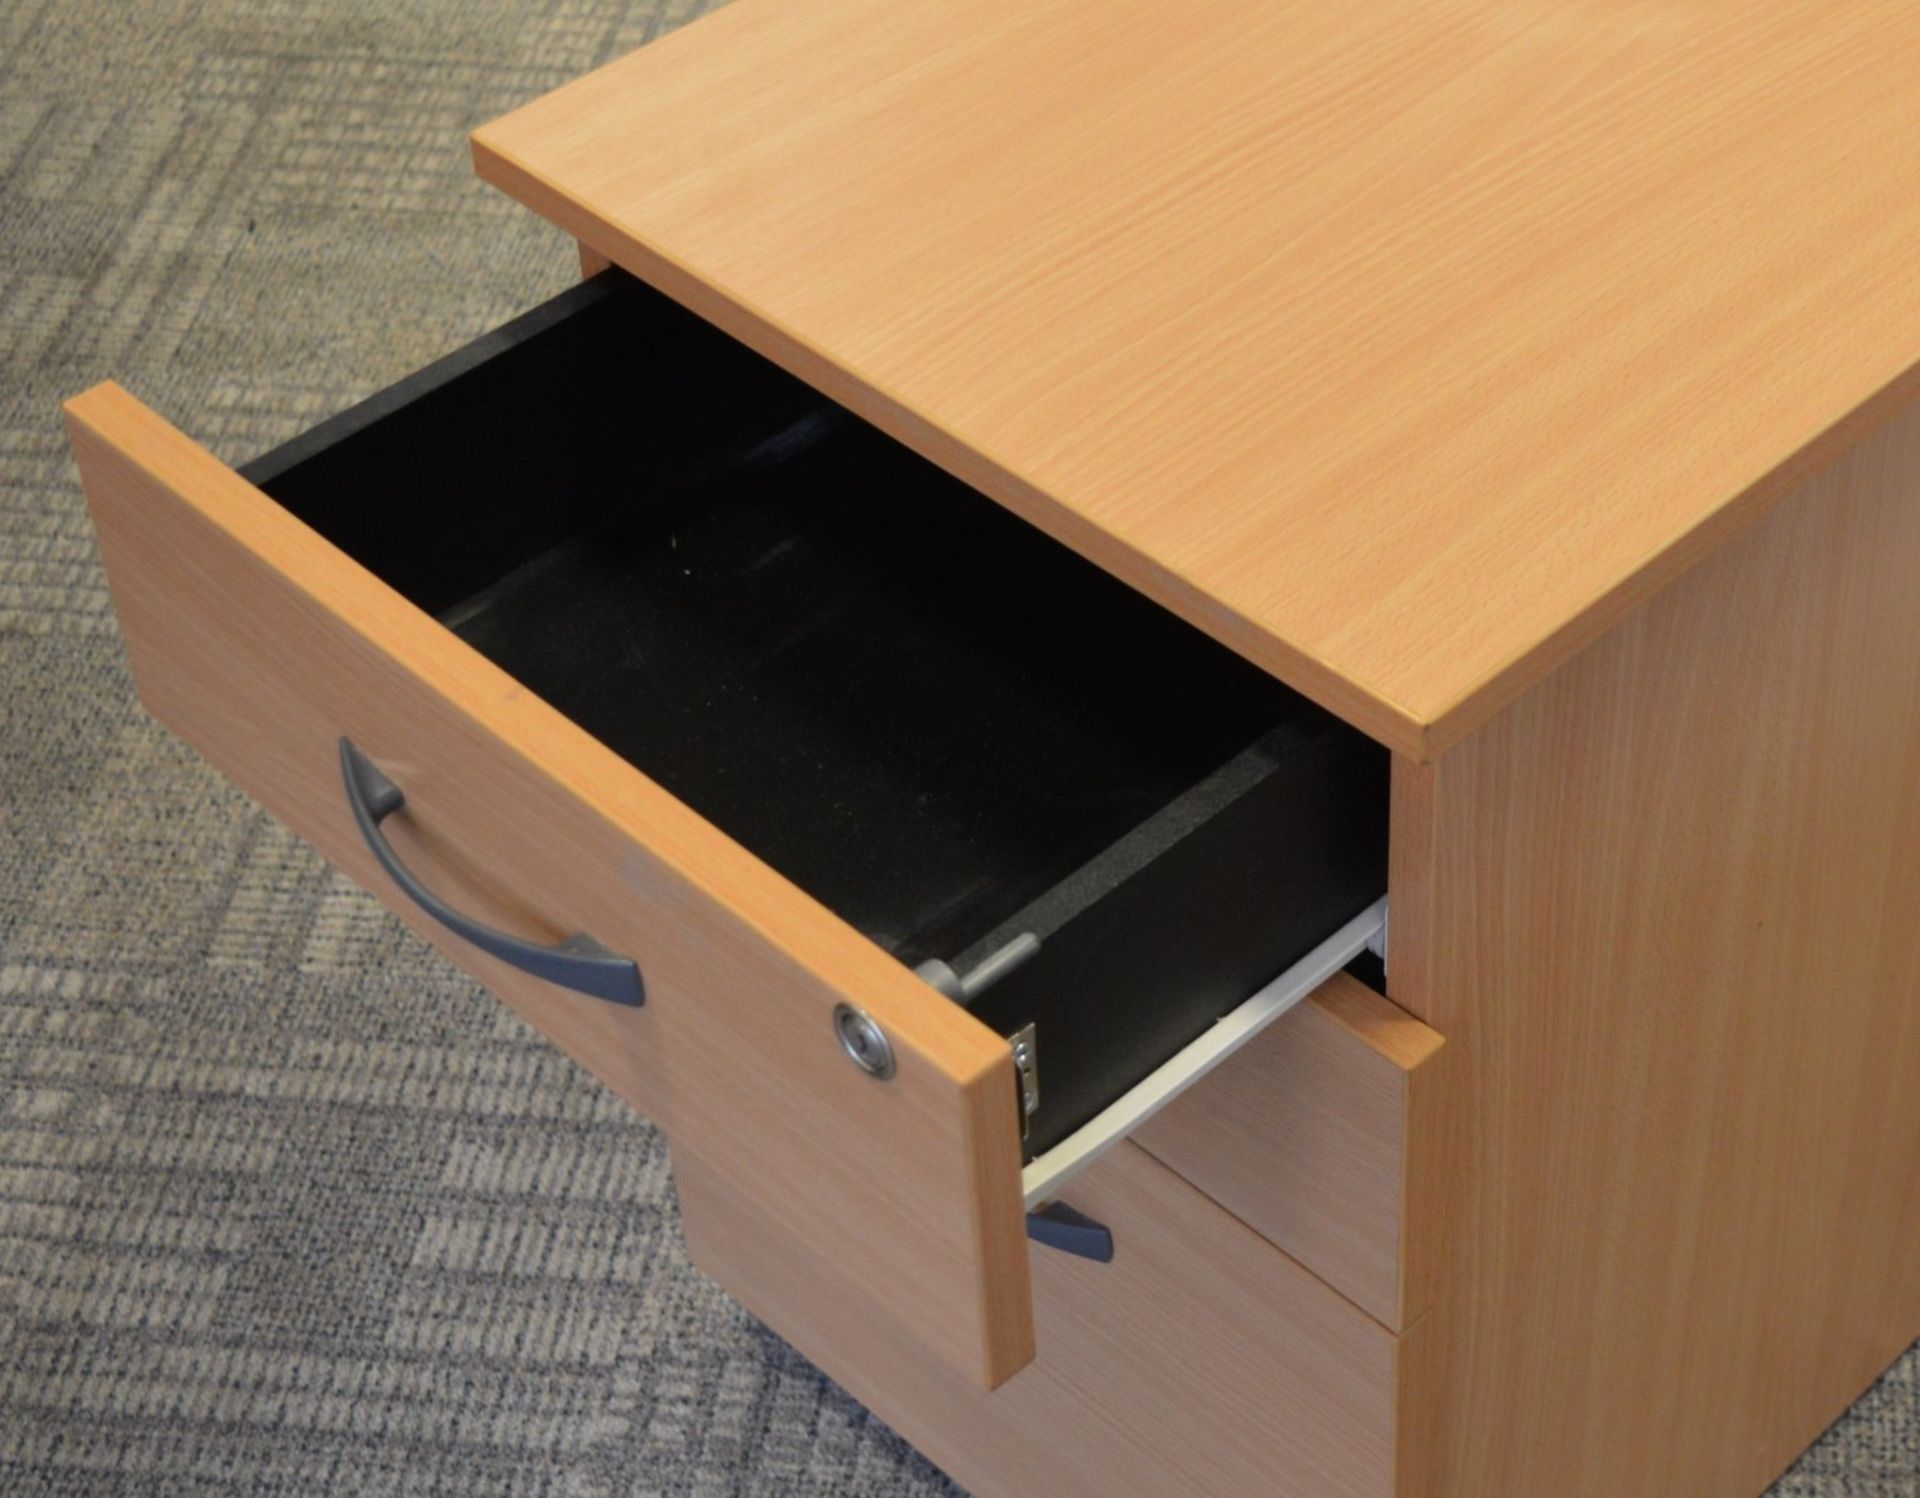 1 x Three Drawer Mobile Pedestal Drawers - With Key - Modern Beech Finish - Two Storage Drawers - Image 4 of 5